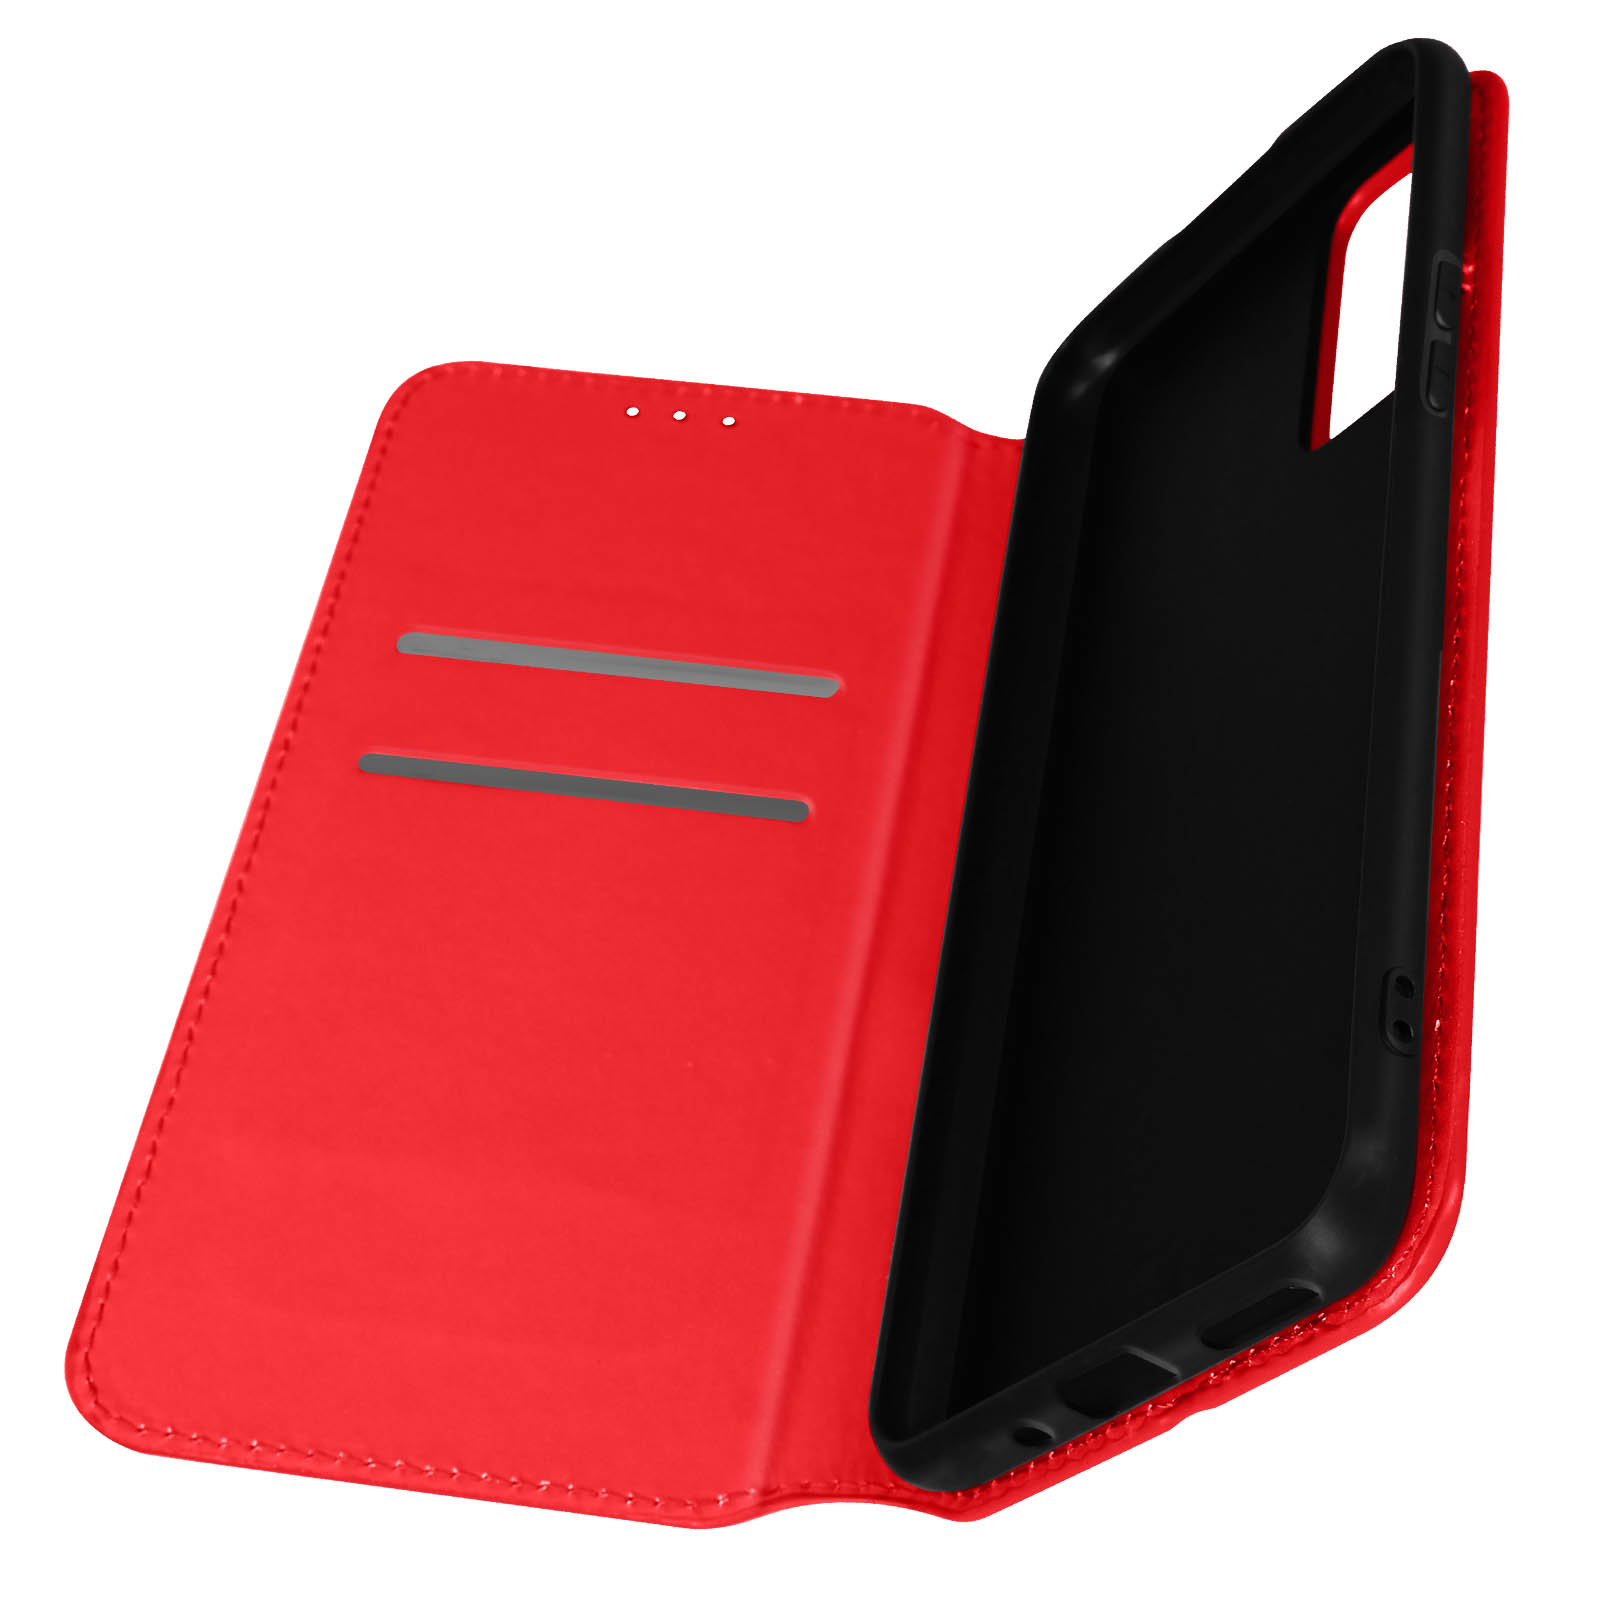 AVIZAR Oppo, Backcover Magnetklappe mit Series, Oppo X5, Find Bookcover, Rot Edition, Classic